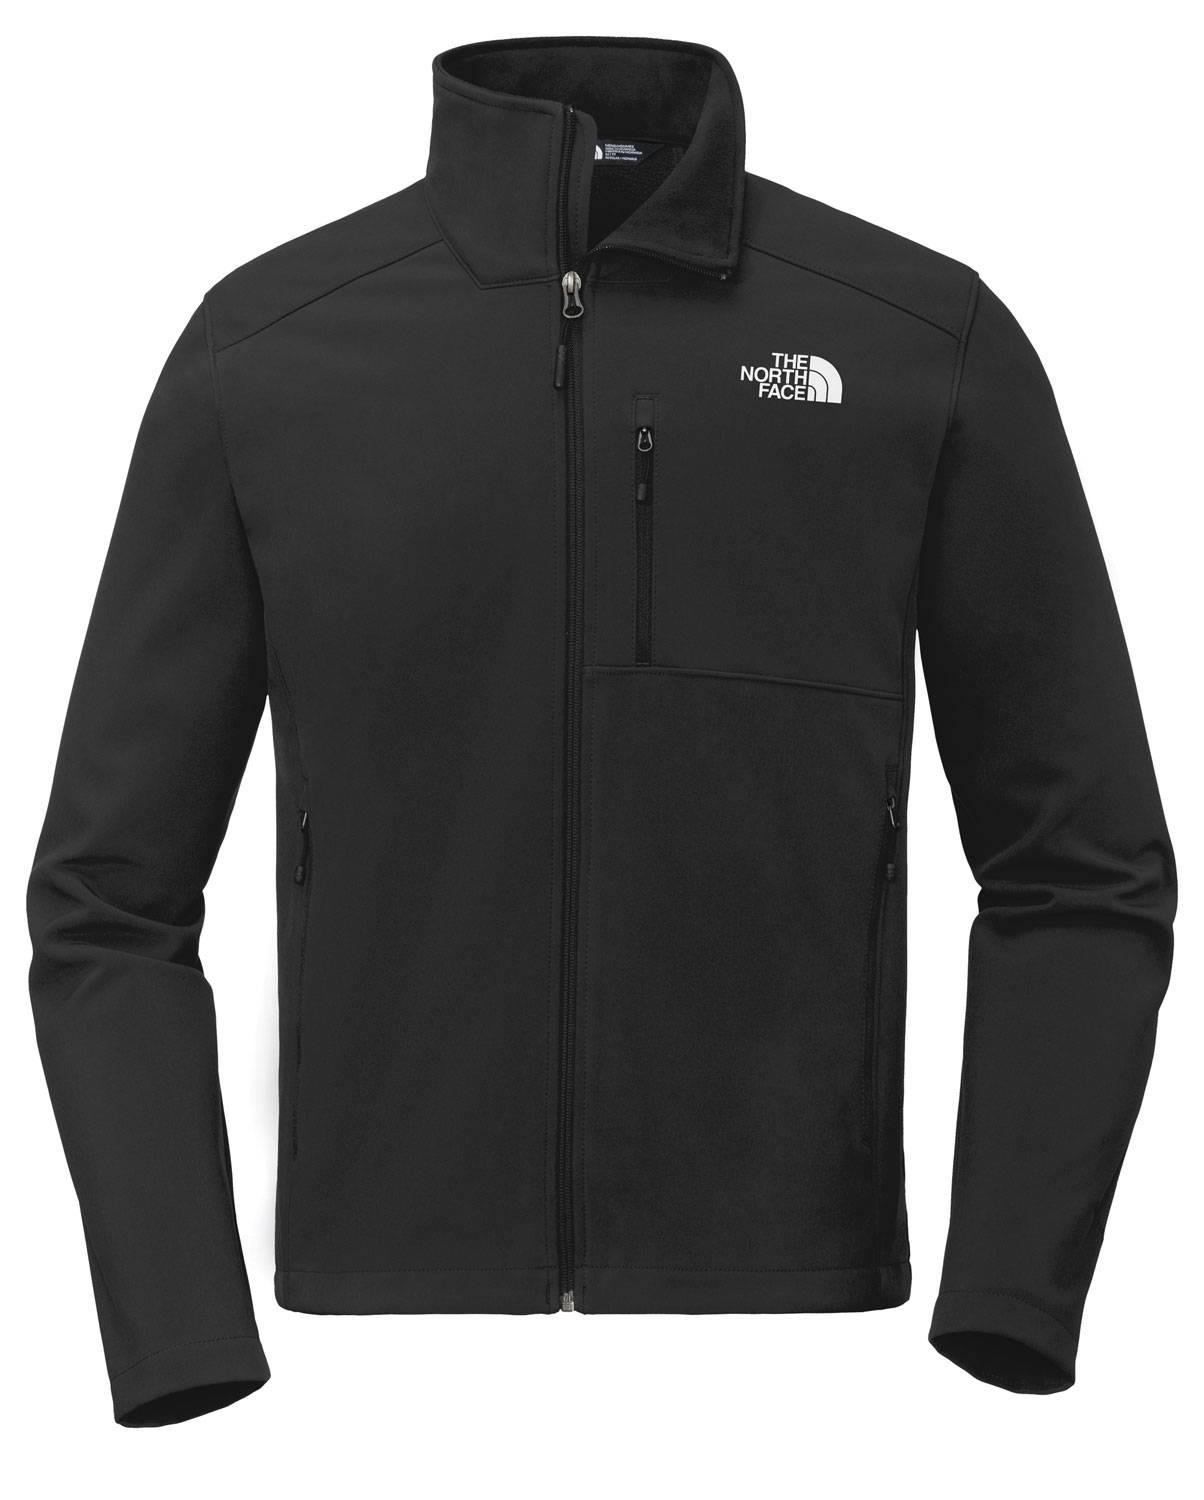 The North Face Apex Barrier Men's Custom Soft Shell Jacket